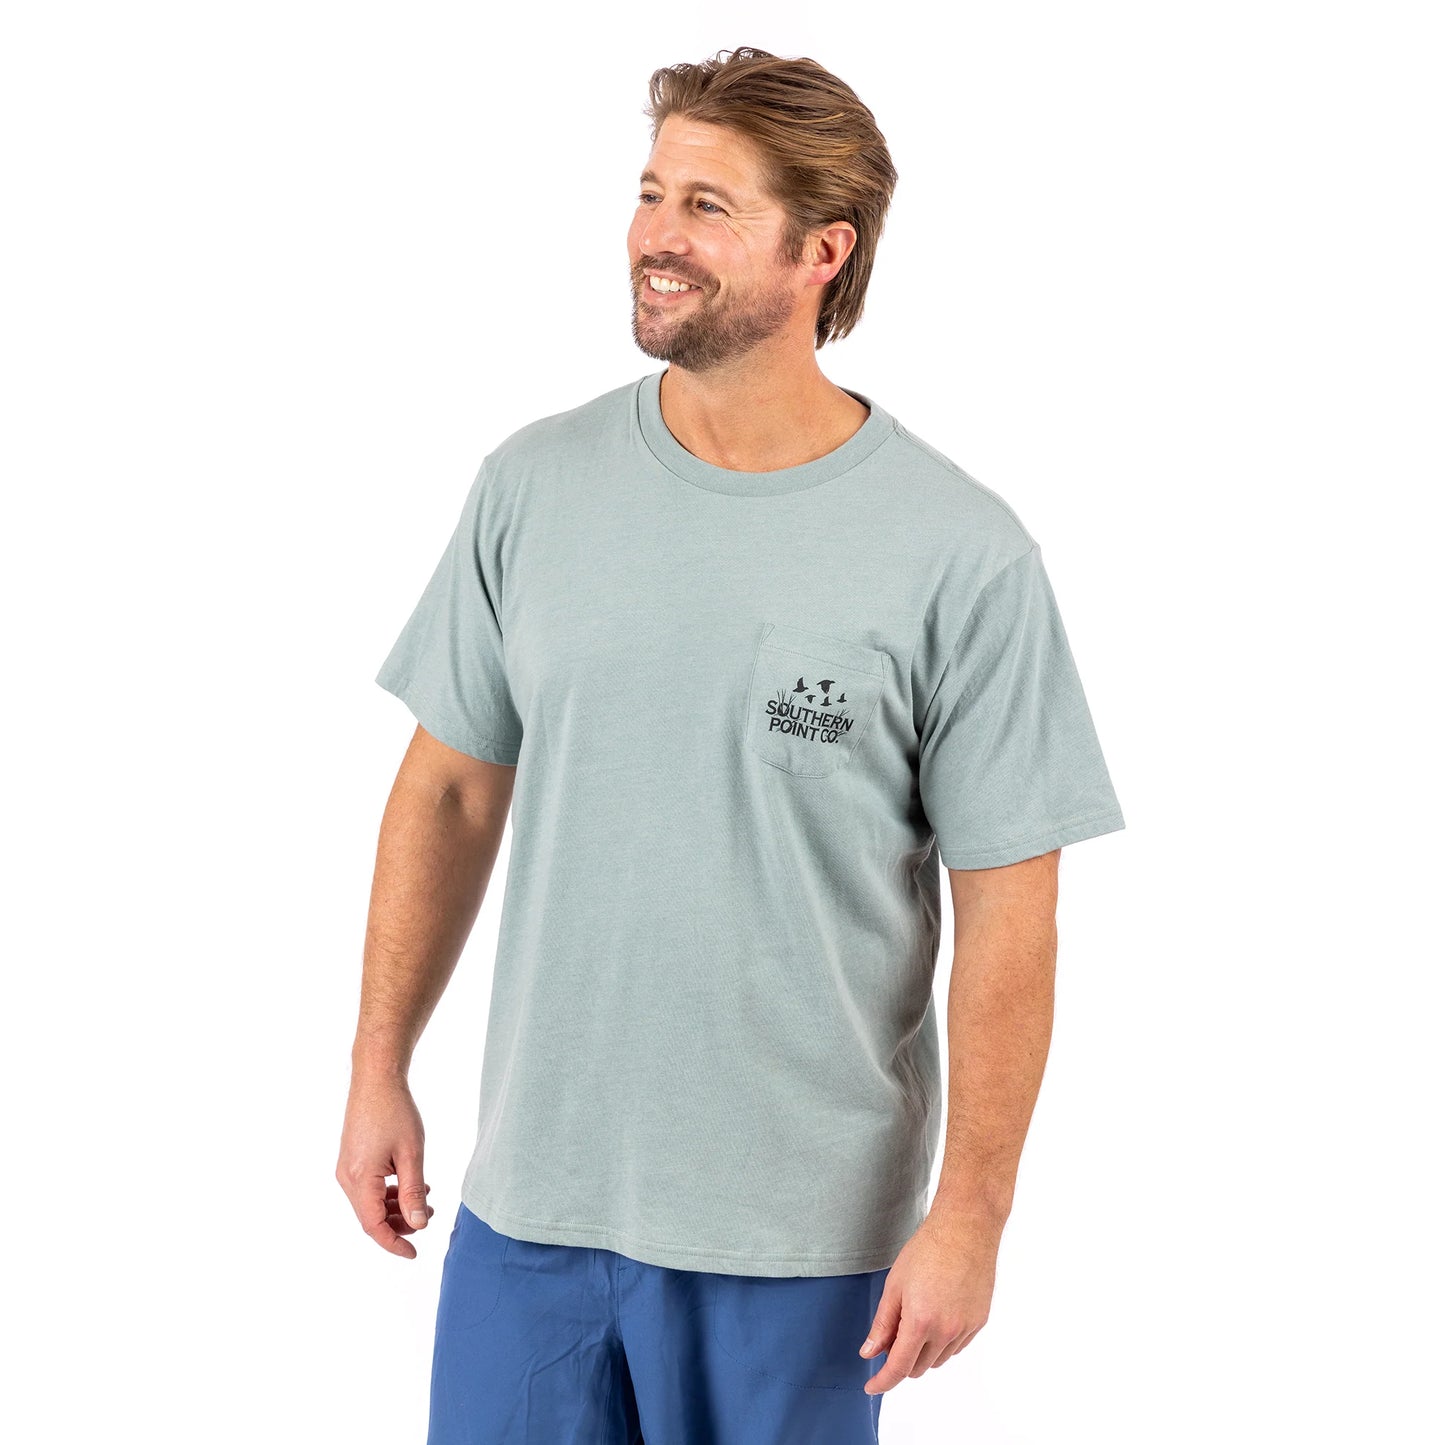 Southern point Outdoor Flush Tee